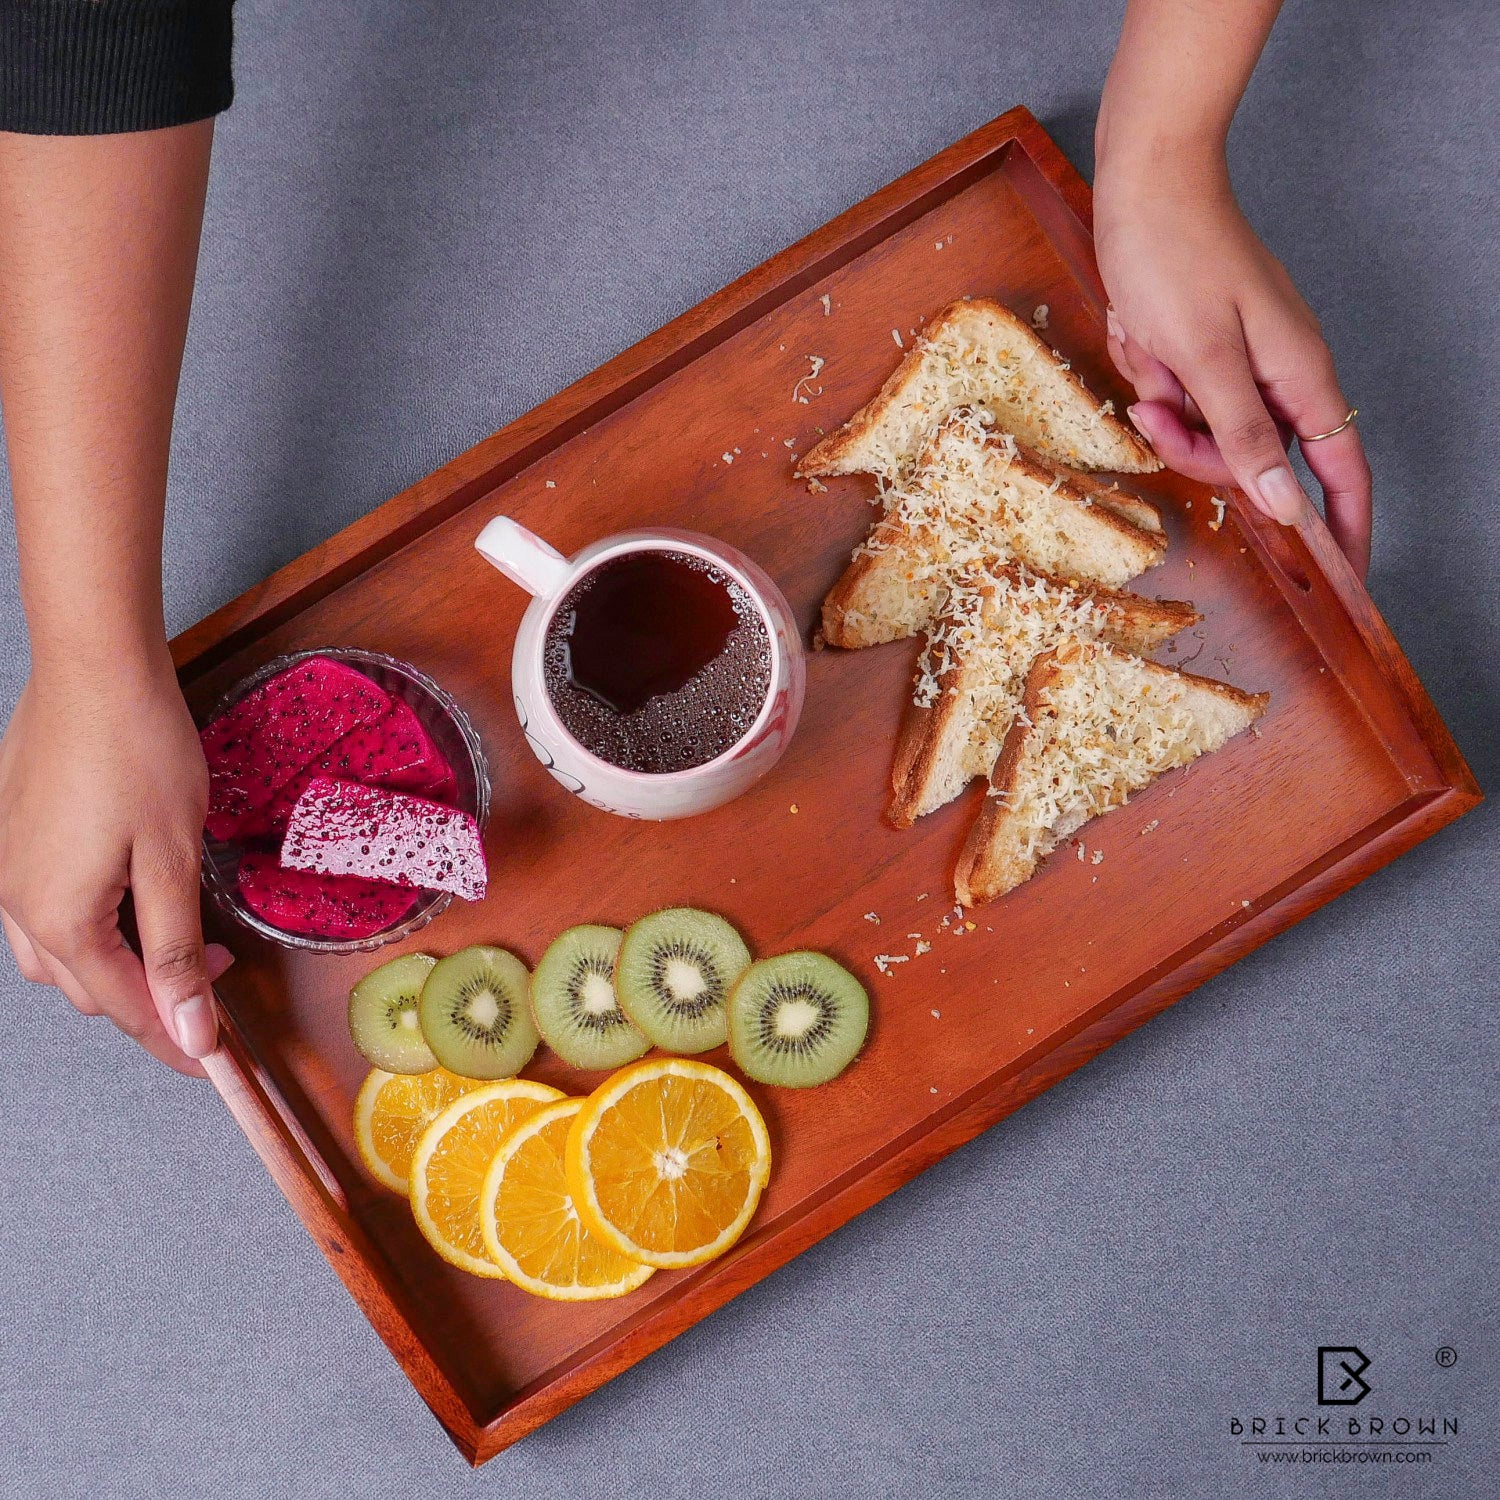 Classic Serving Tray from Mahogany Collection (Large)